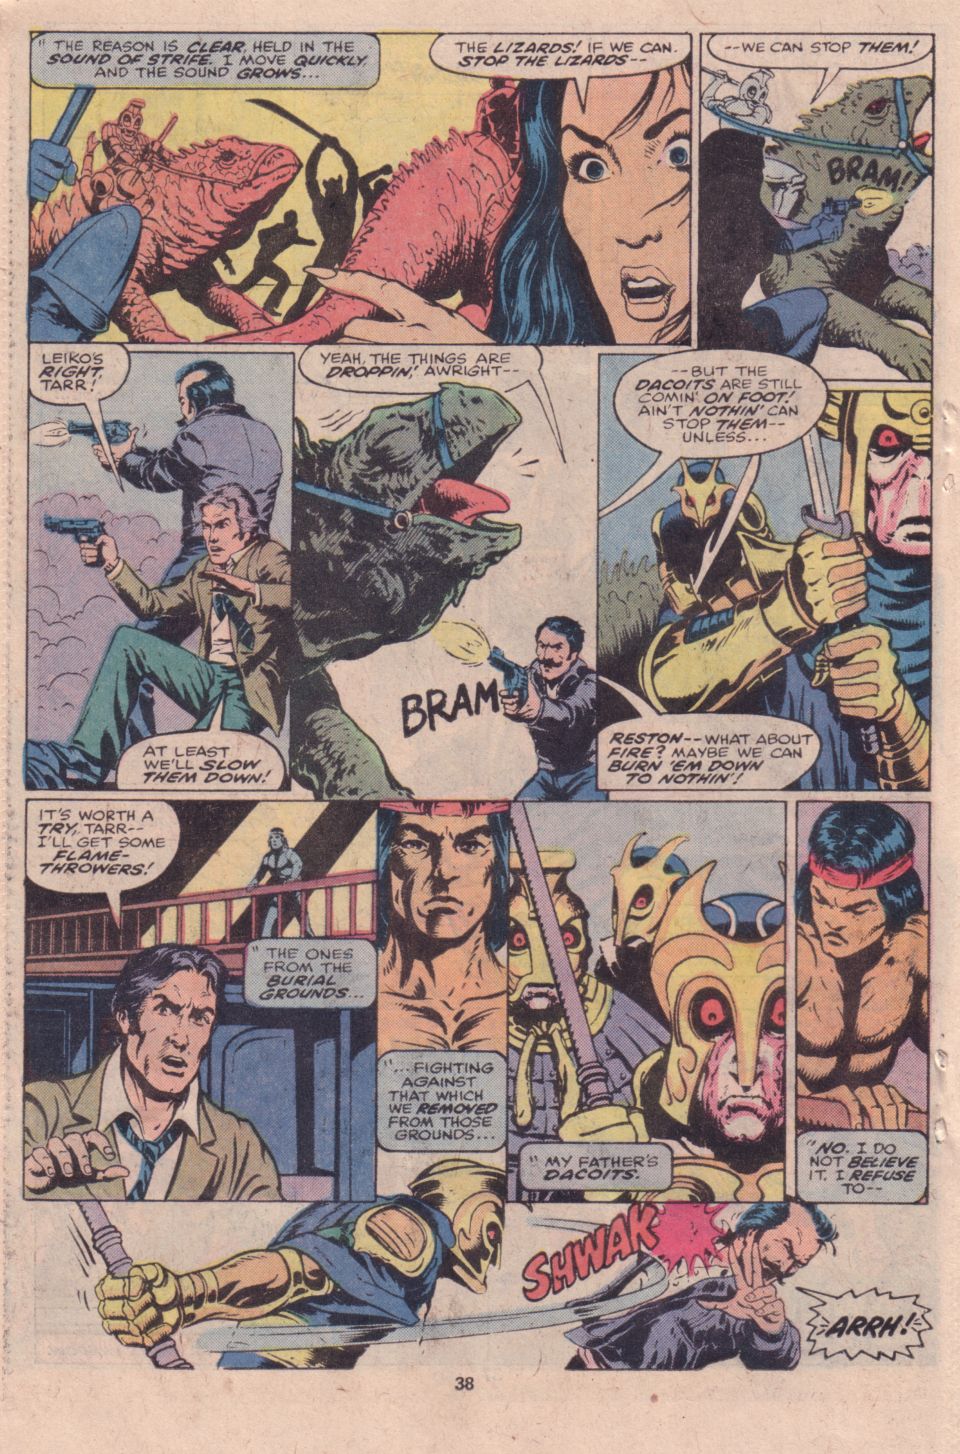 What If? (1977) issue 16 - Shang Chi Master of Kung Fu fought on The side of Fu Manchu - Page 30